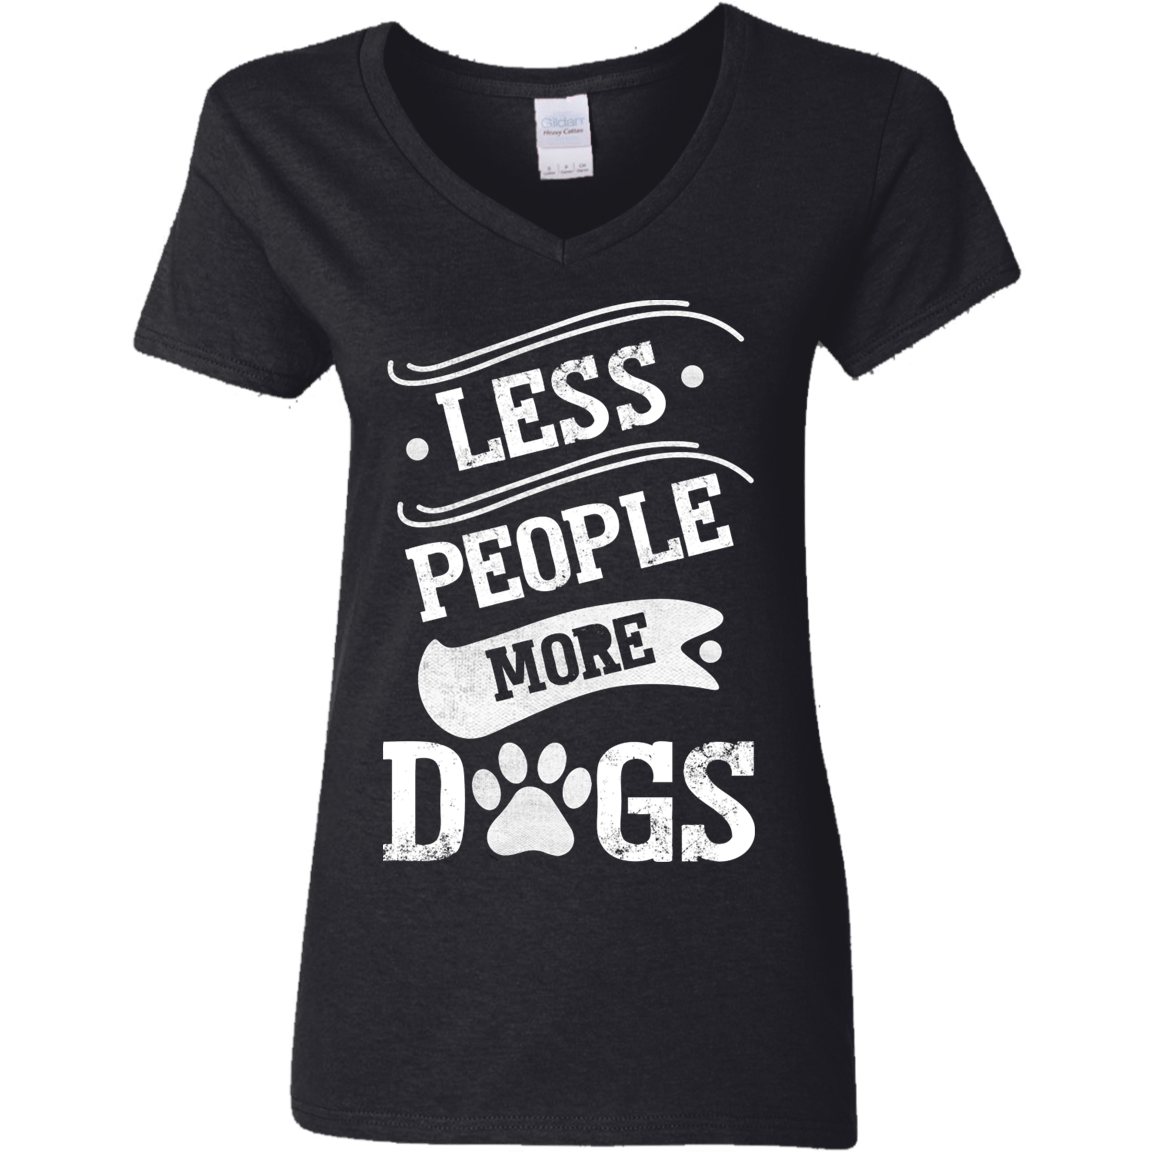 Less People More Dogs - Ladies V Neck.